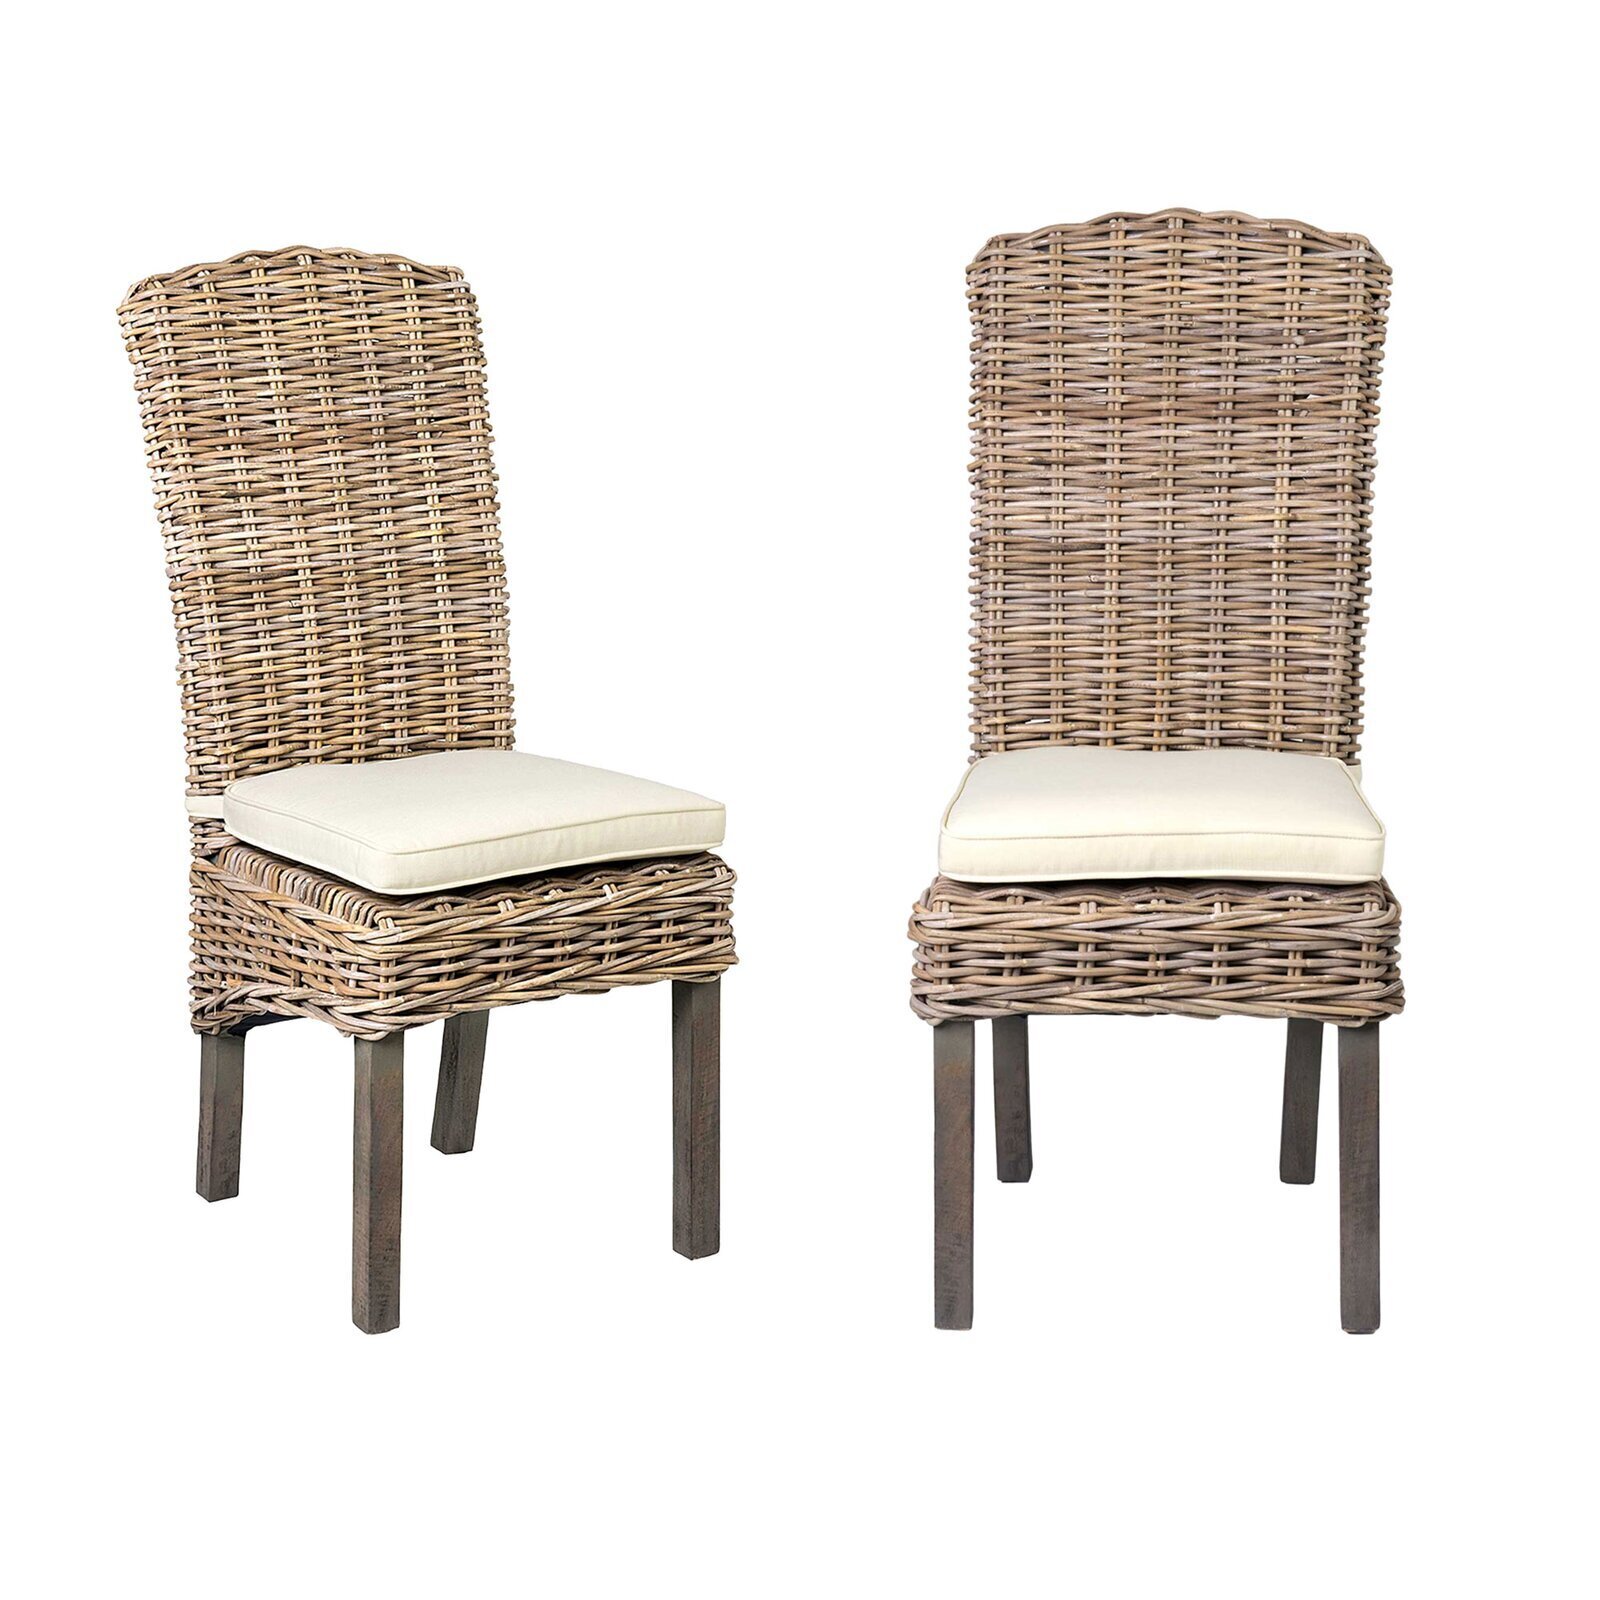 Rattan Dining Chairs with Seat Cushion